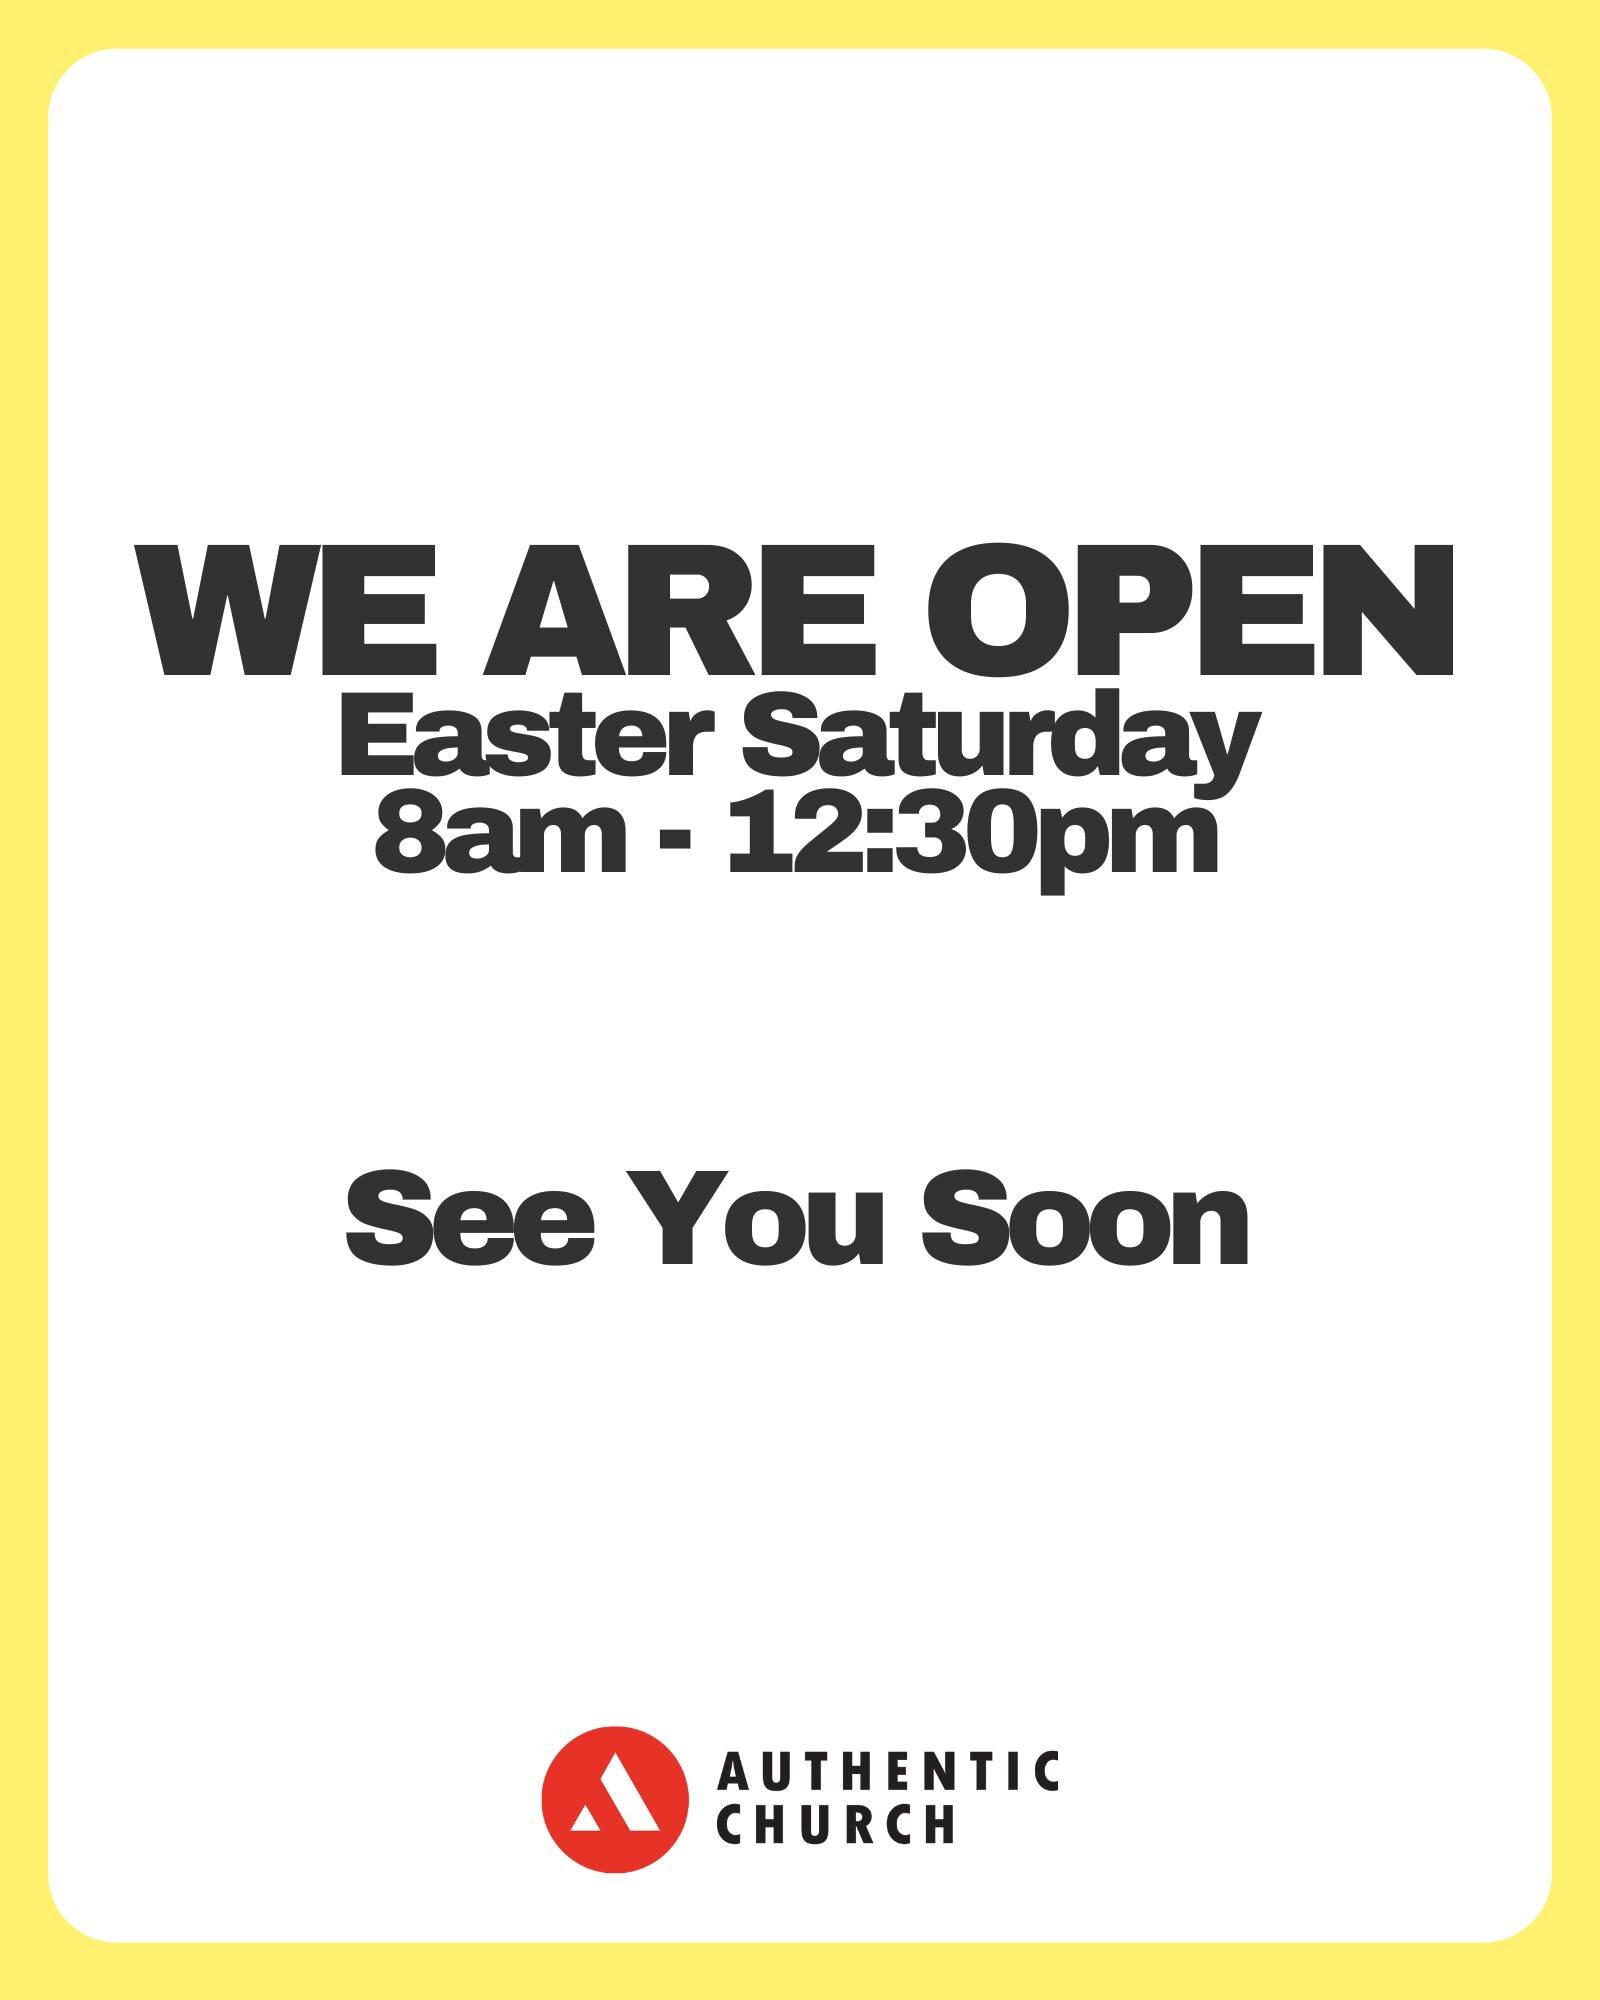 We are still open for all your Easter needs. We'll see you very soon!!!